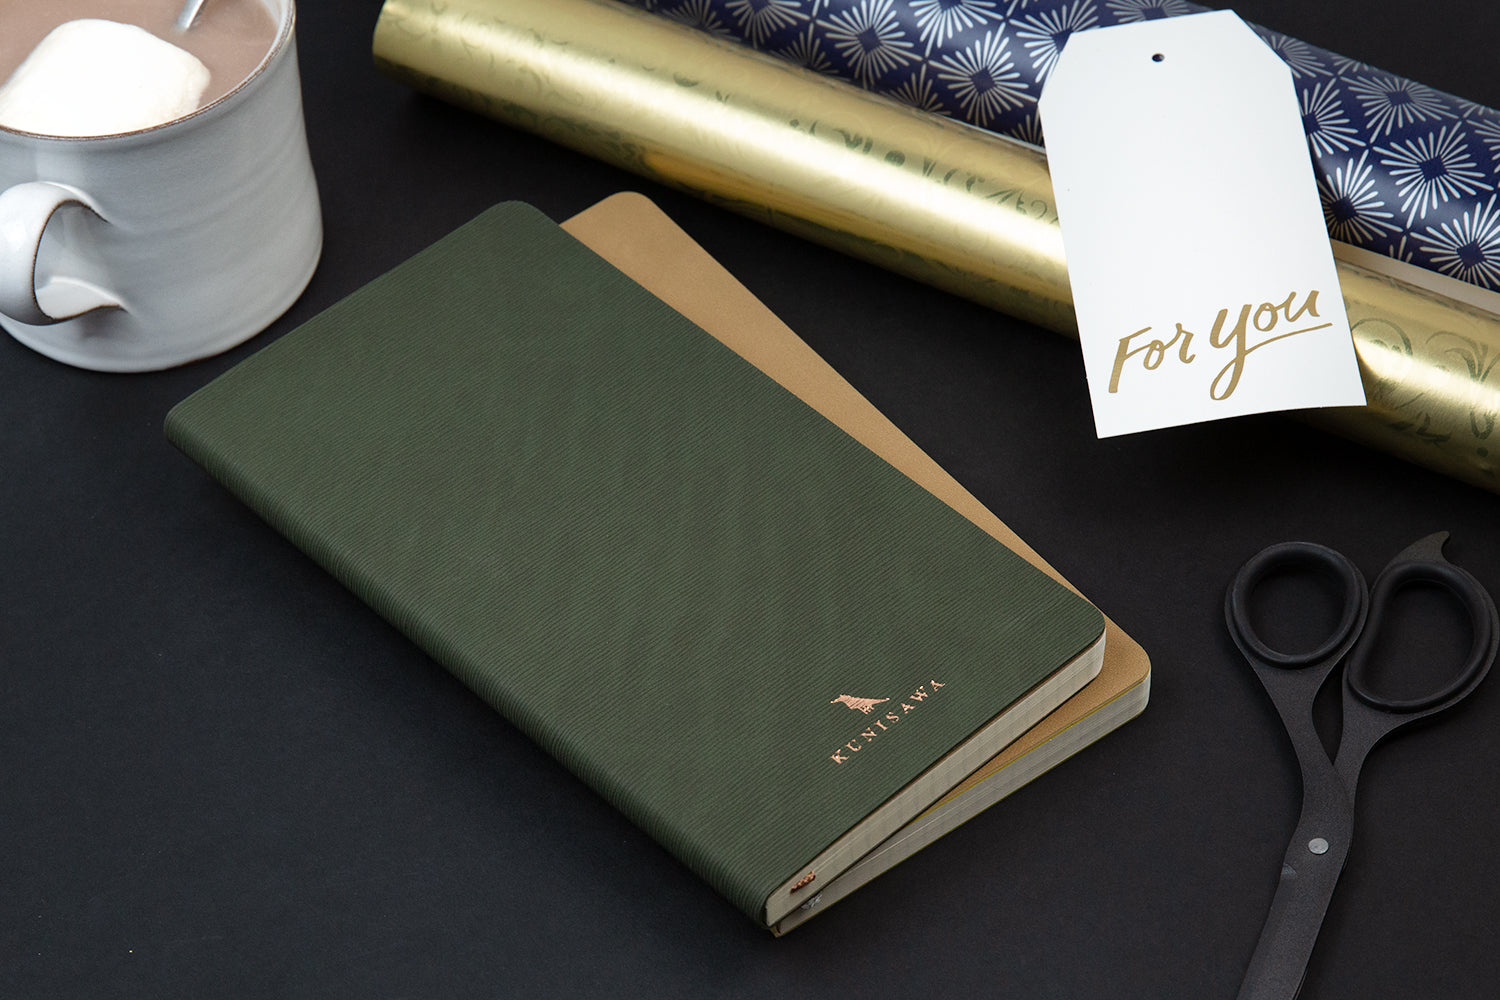 a green kunisawa notebook and a gold kunisawa notebook on a black table with wrapping paper and a gift tag